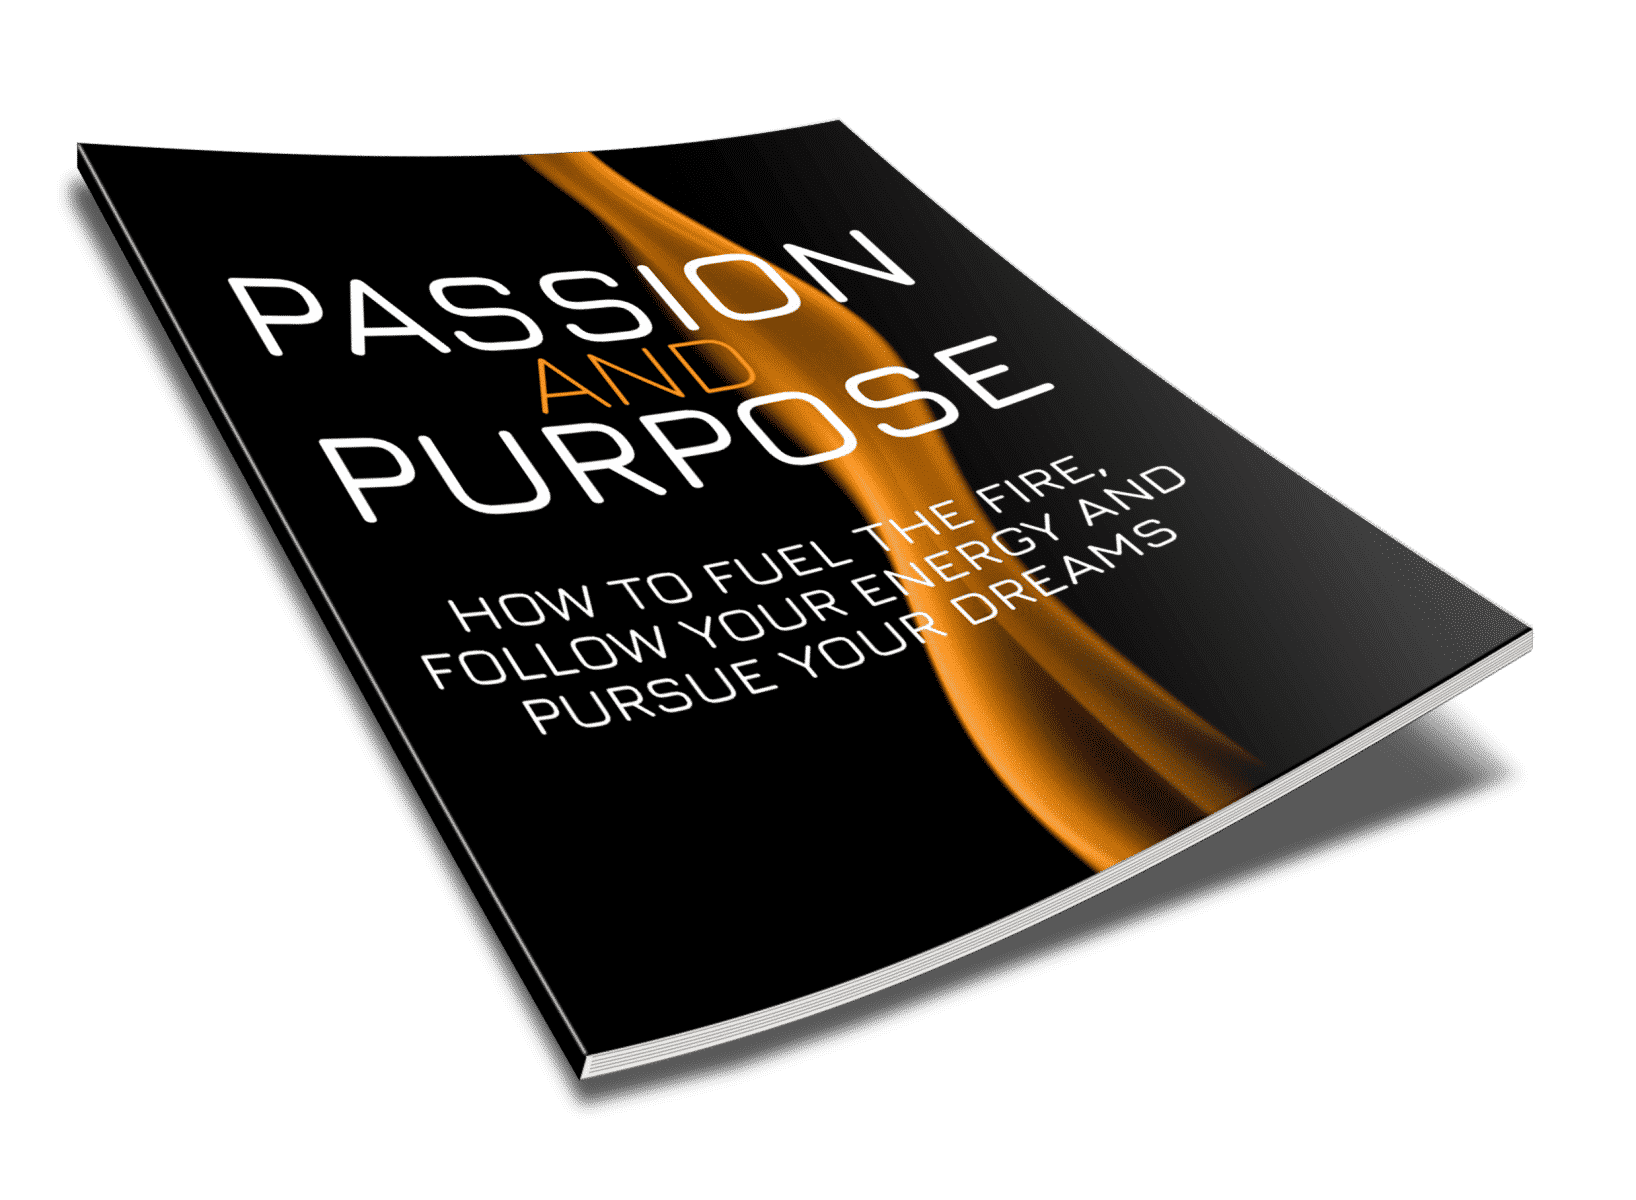 7 Tips to Keep the Passion Burning!